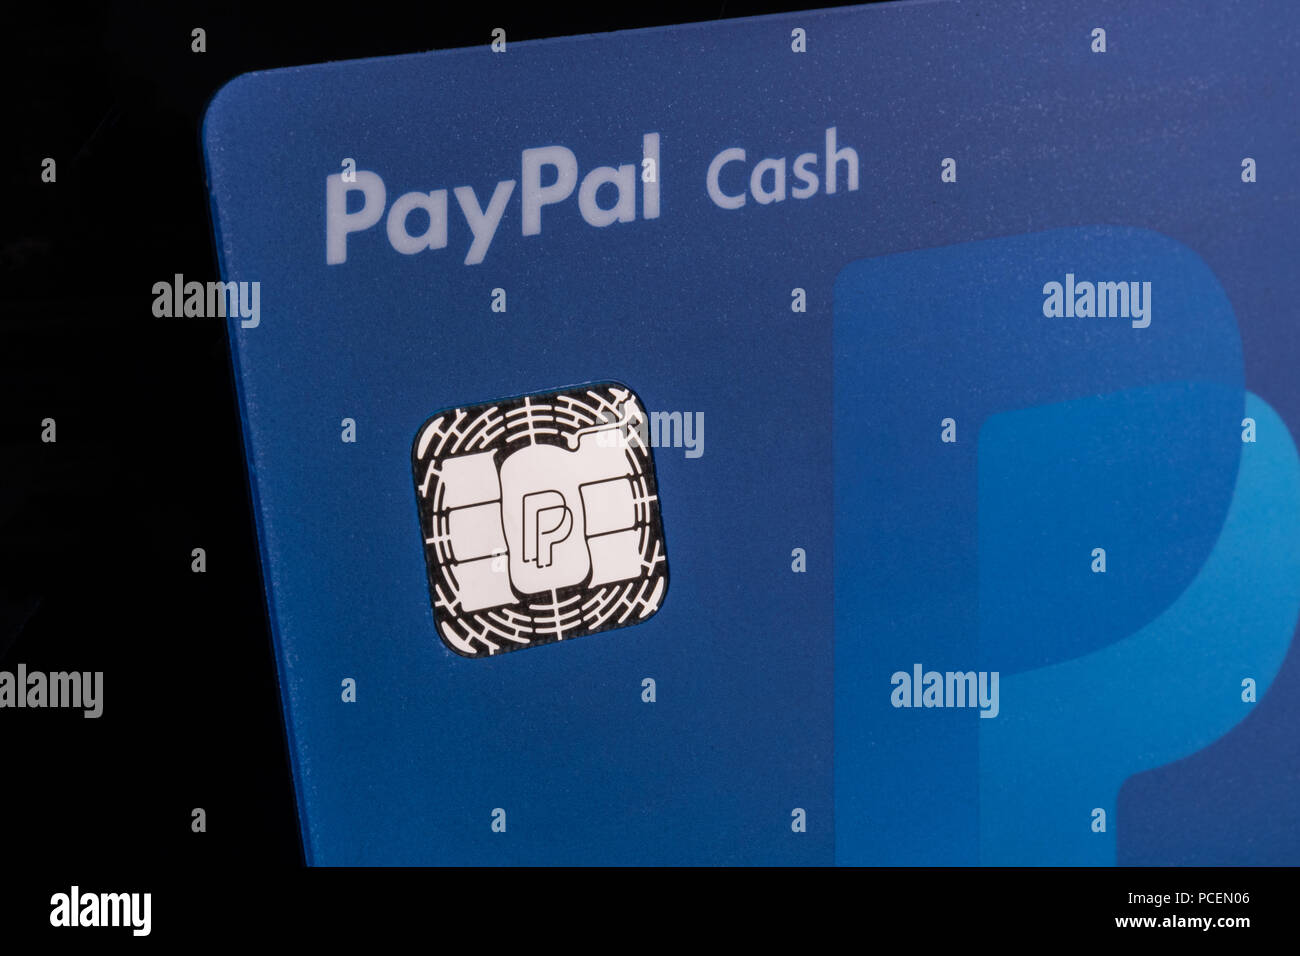 Indianapolis - Circa July 2018: PayPal Debit Cash card. PayPal offers a digital payment platform allowing online and mobile transactions I Stock Photo